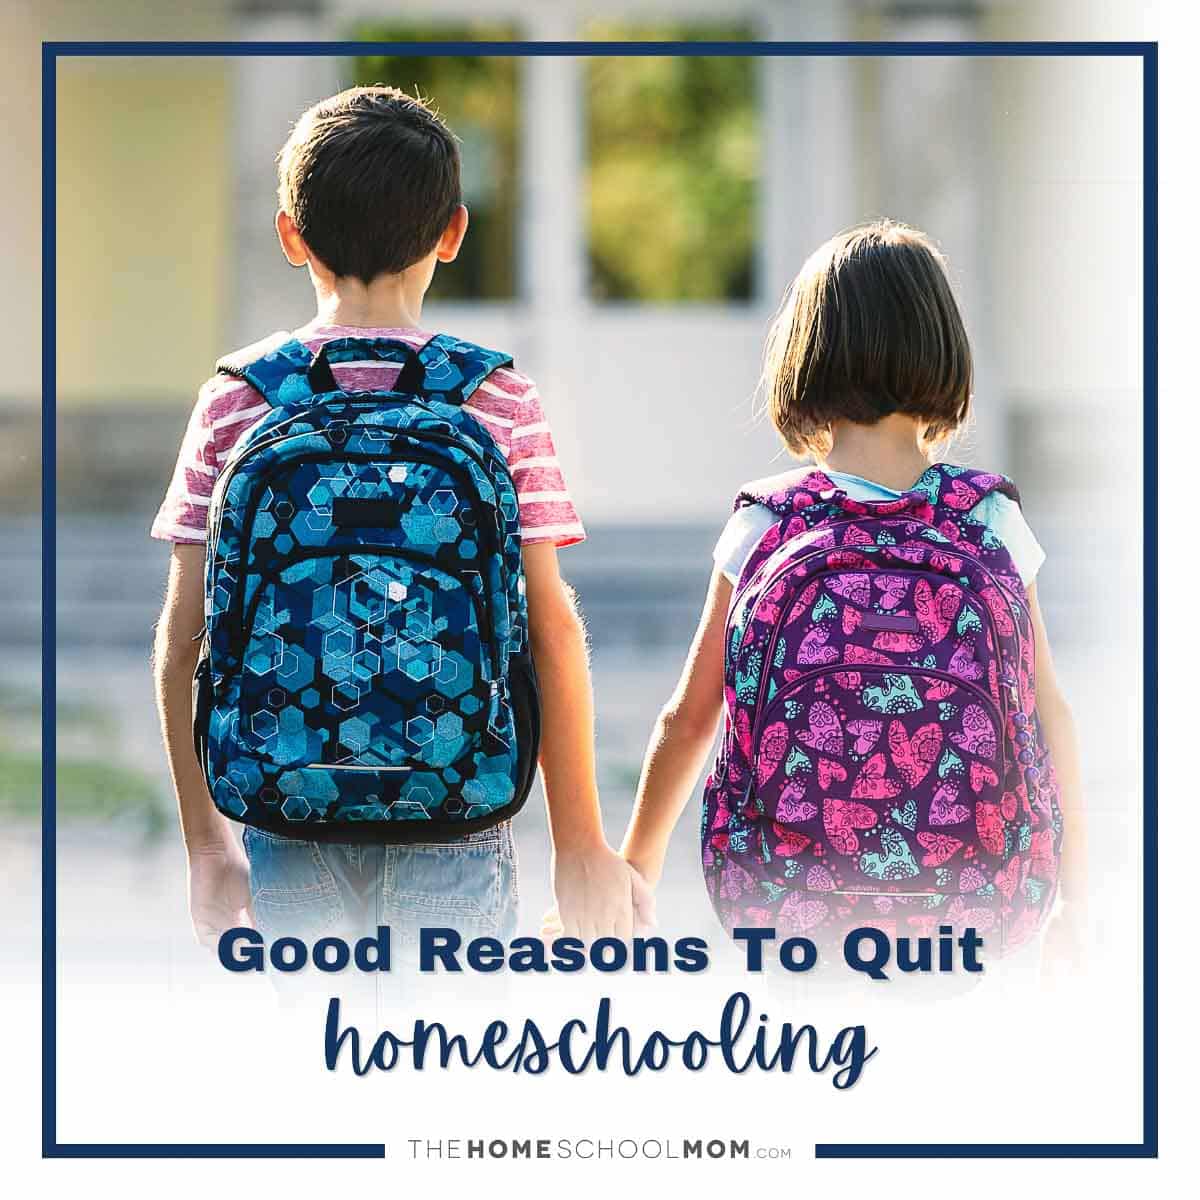 Good reasons to quit homeschooling.